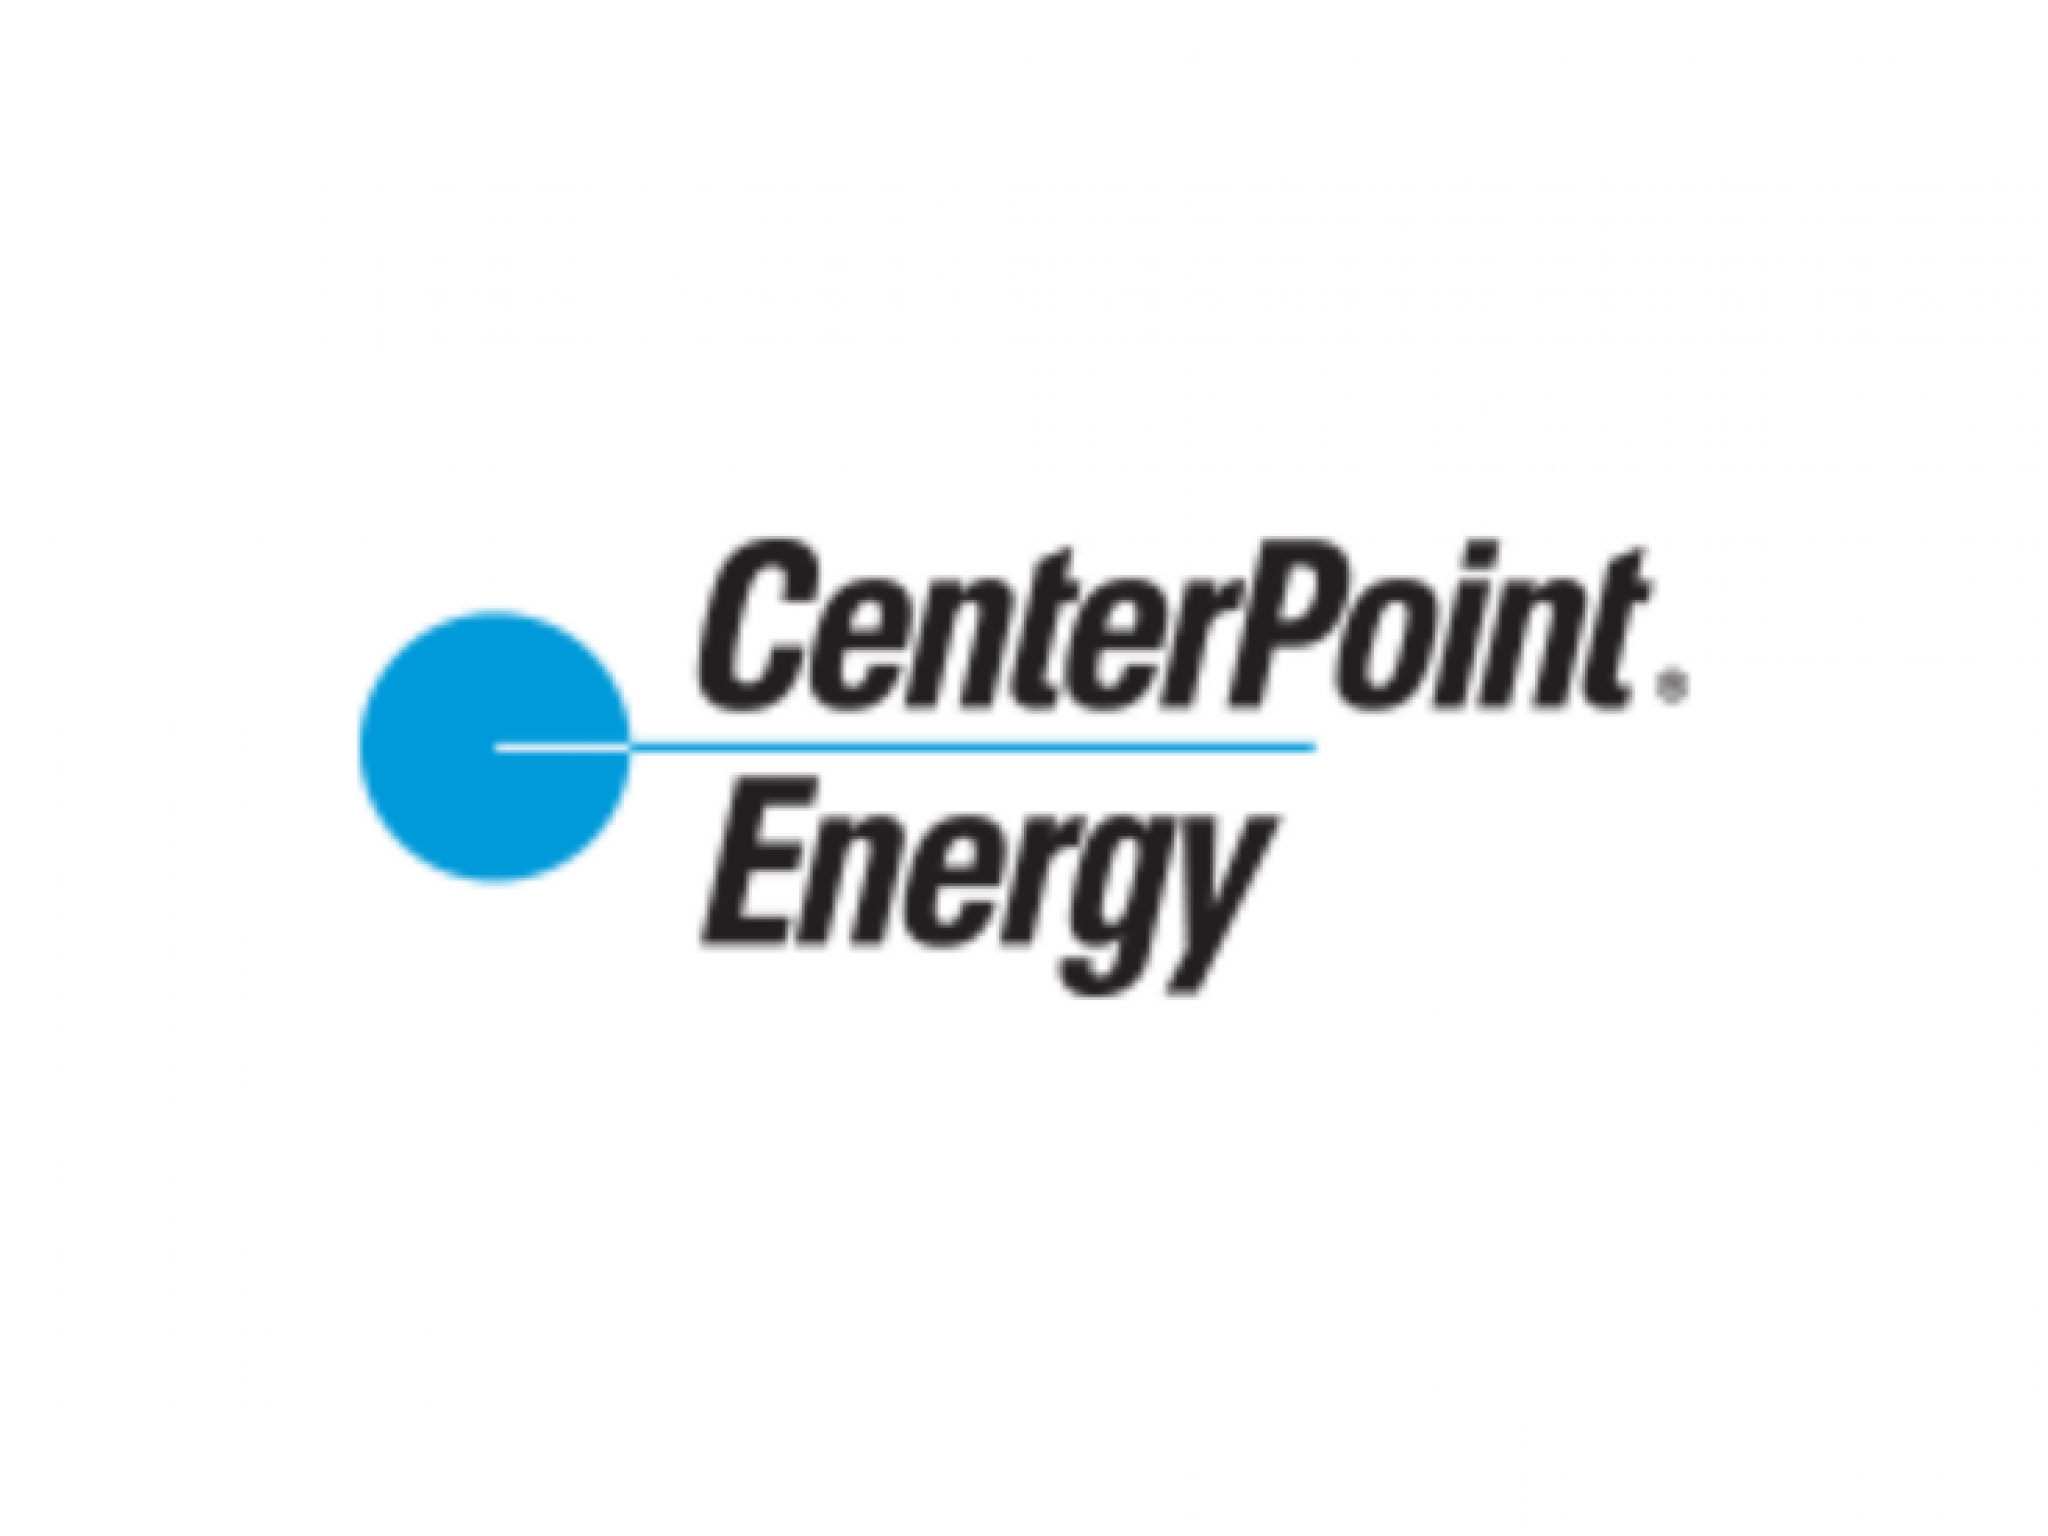  centerpoint-energy-discloses-12b-sale-of-gas-assets-fuels-capital-expansion-plans-after-q4-results 